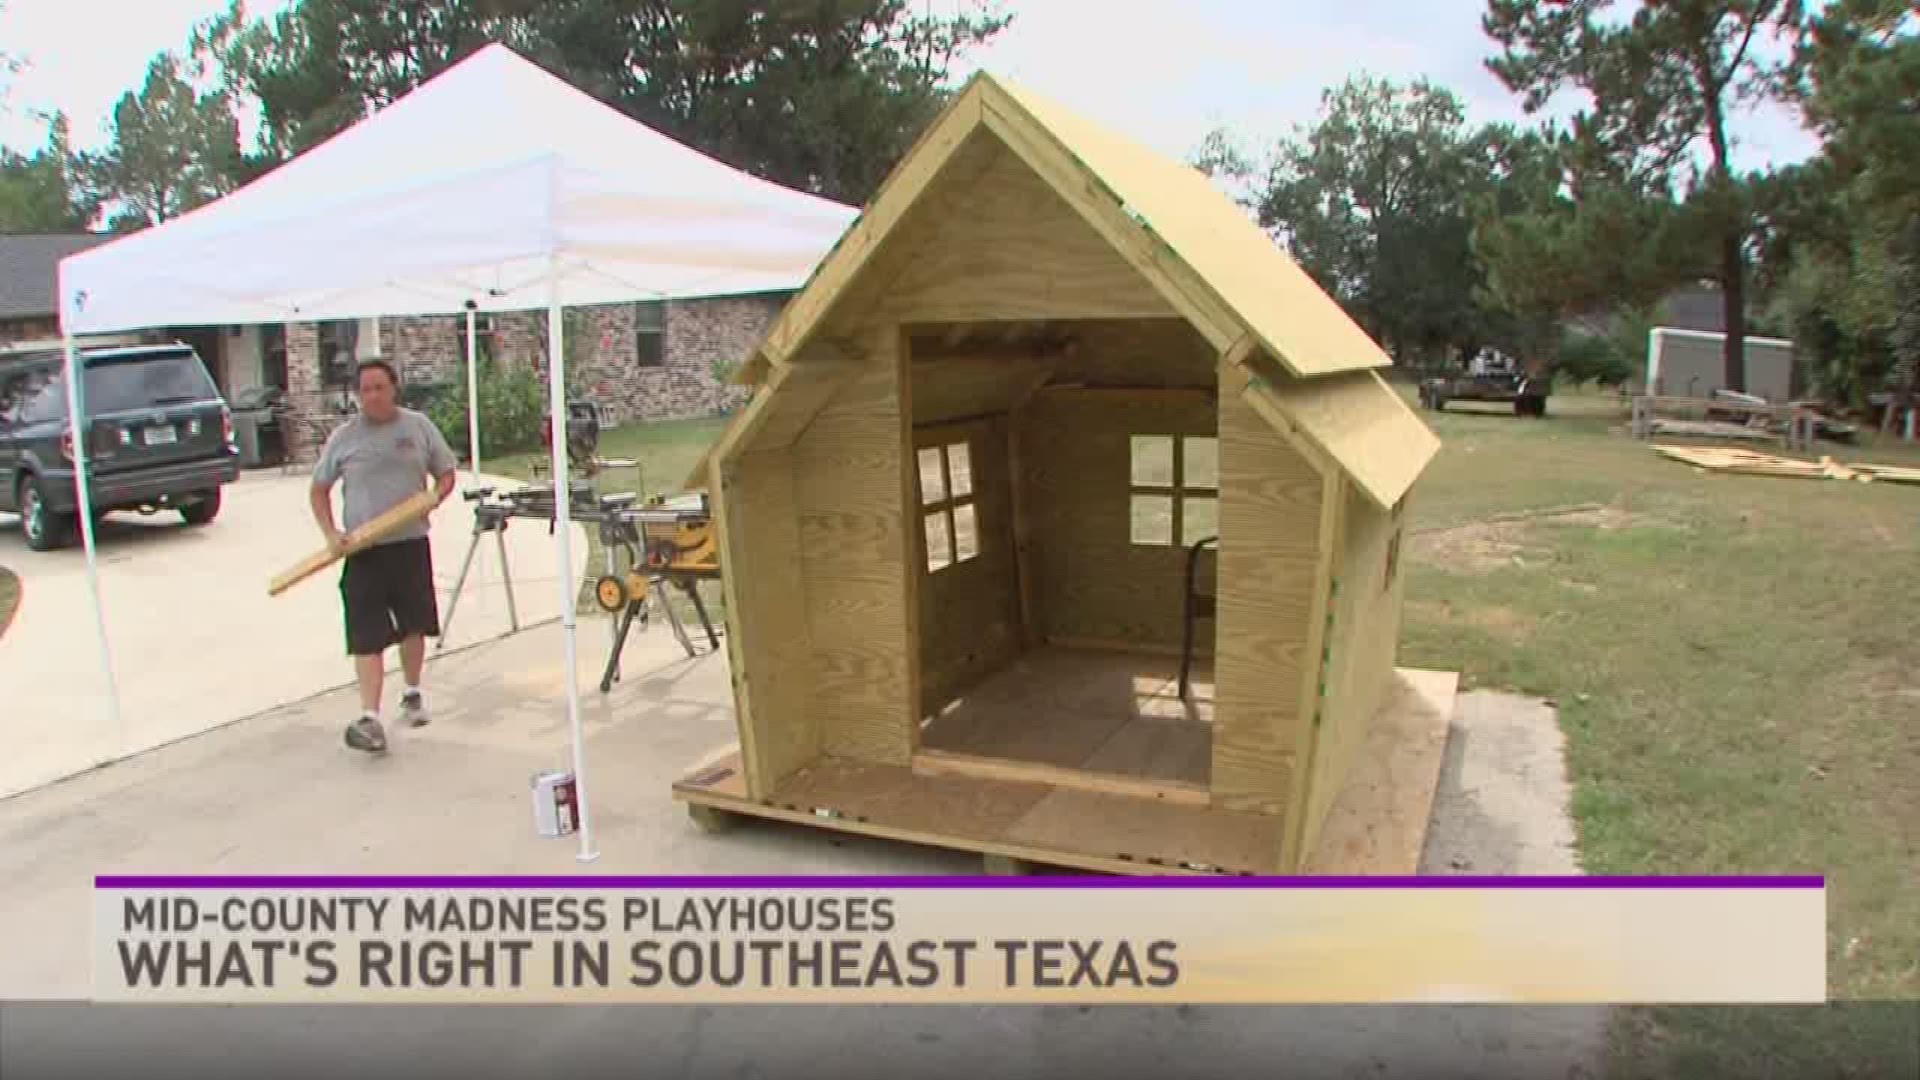 CASA of Southeast Texas gets involved in Mid-County Madness this year with two special playhouses being raffled off to benefit CASA. this week it's "what's right in Southeast Texas!"